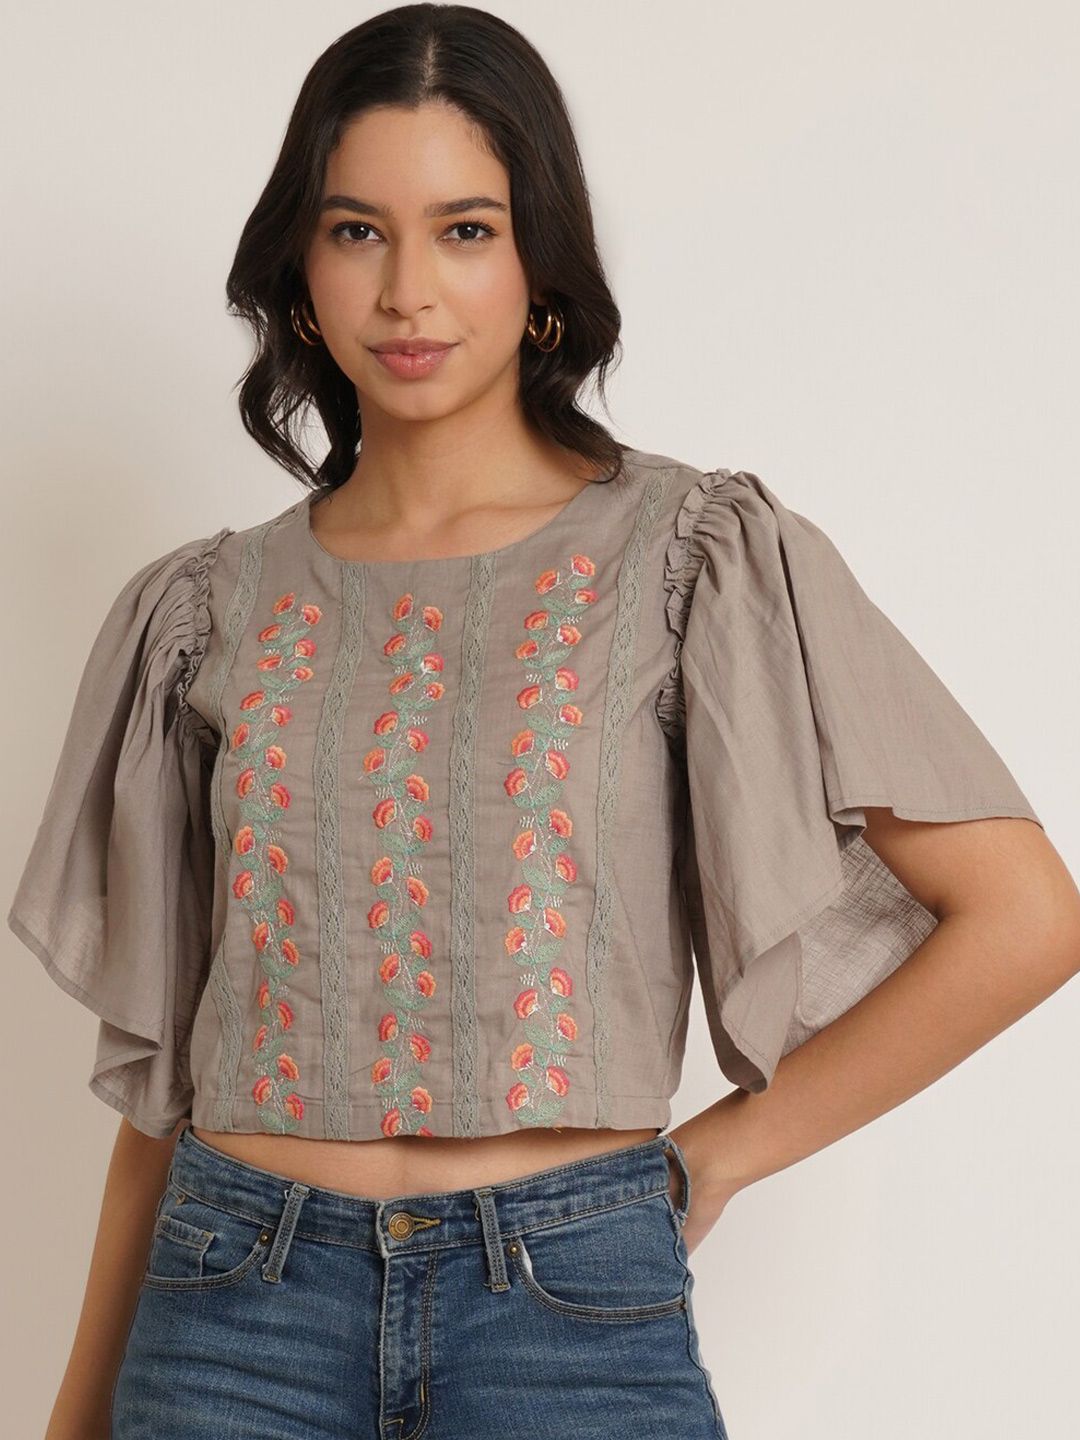 IX IMPRESSION Grey Floral Embroidered Flared Sleeve Cotton Tank Crop Top Price in India